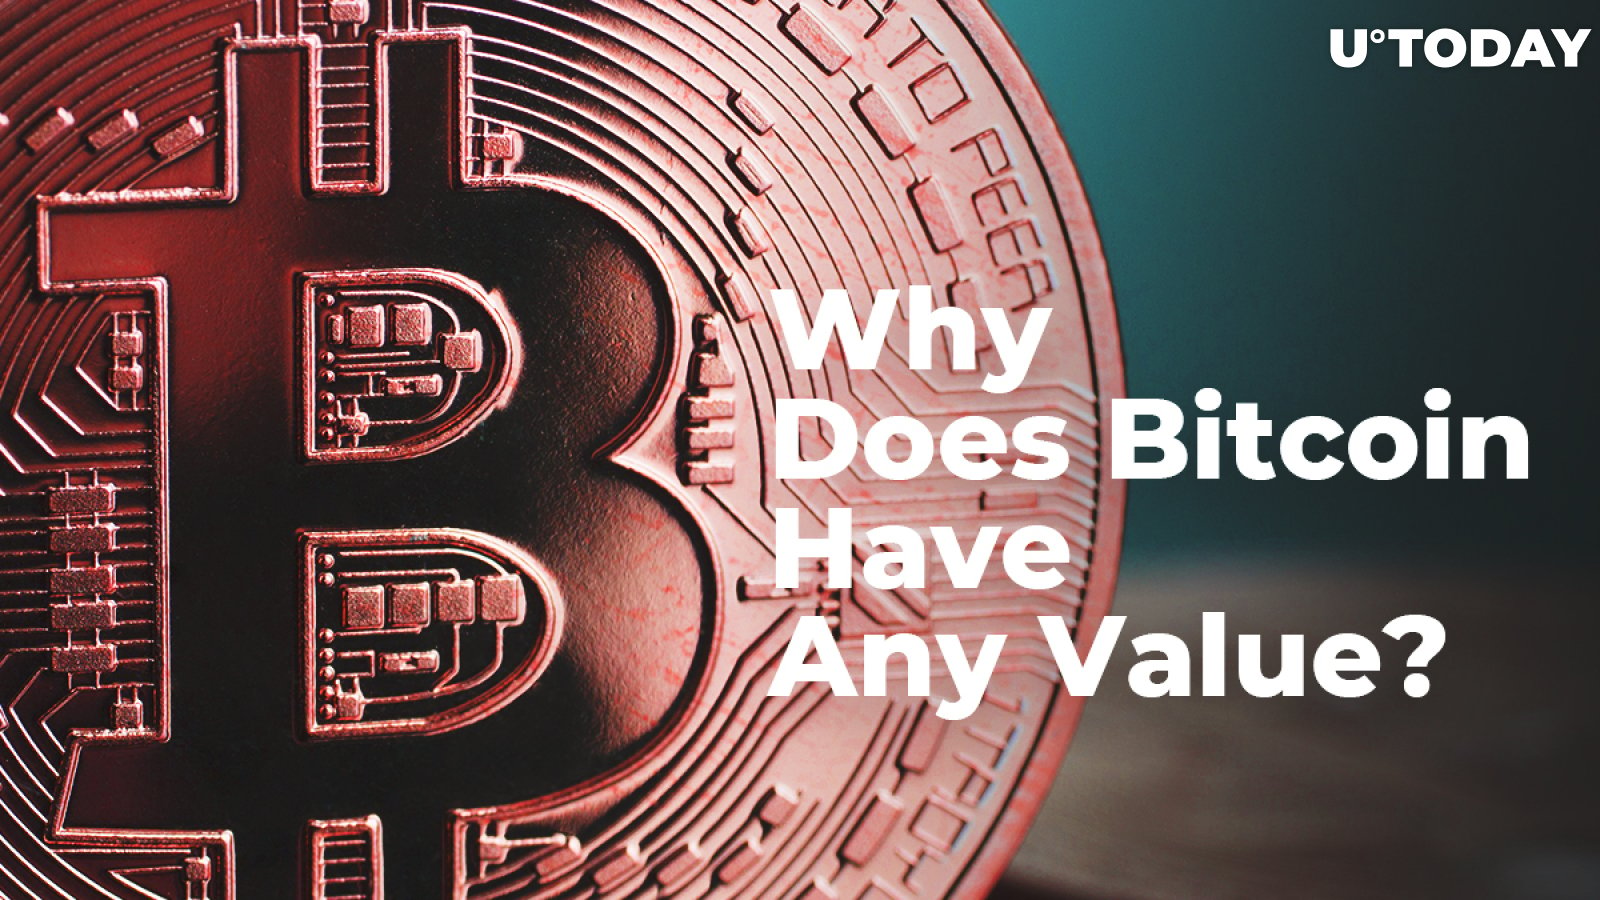 Why Does Bitcoin Have Any Value?